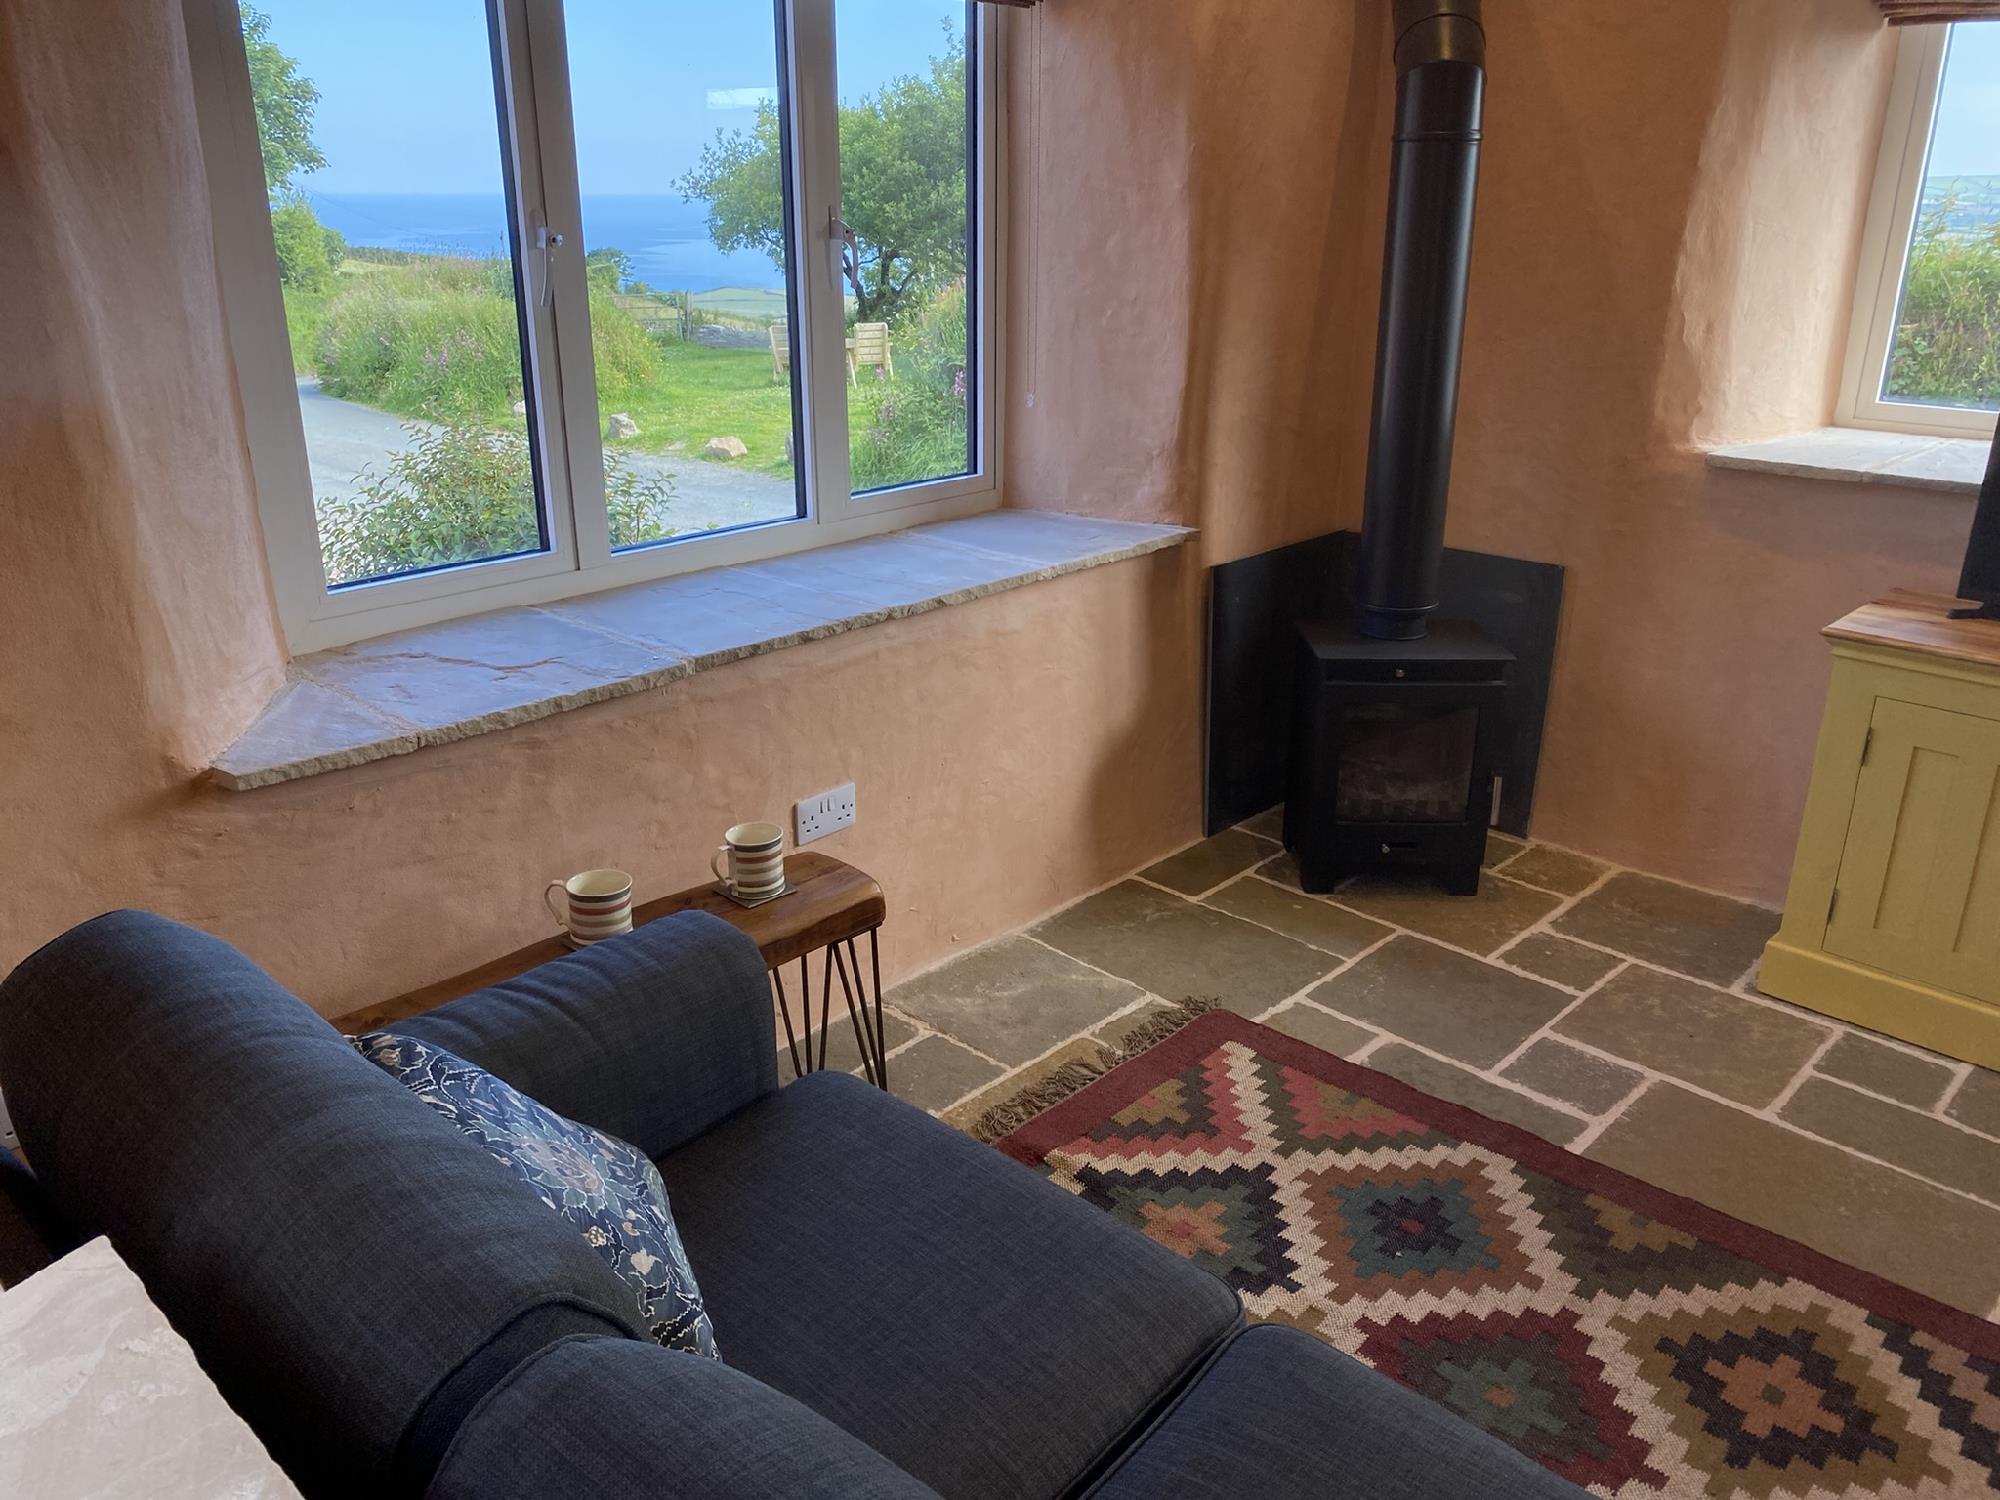  Sea view Blueberry Cottage at Polrunny Farm holiday cottages Boscastle Cornwall